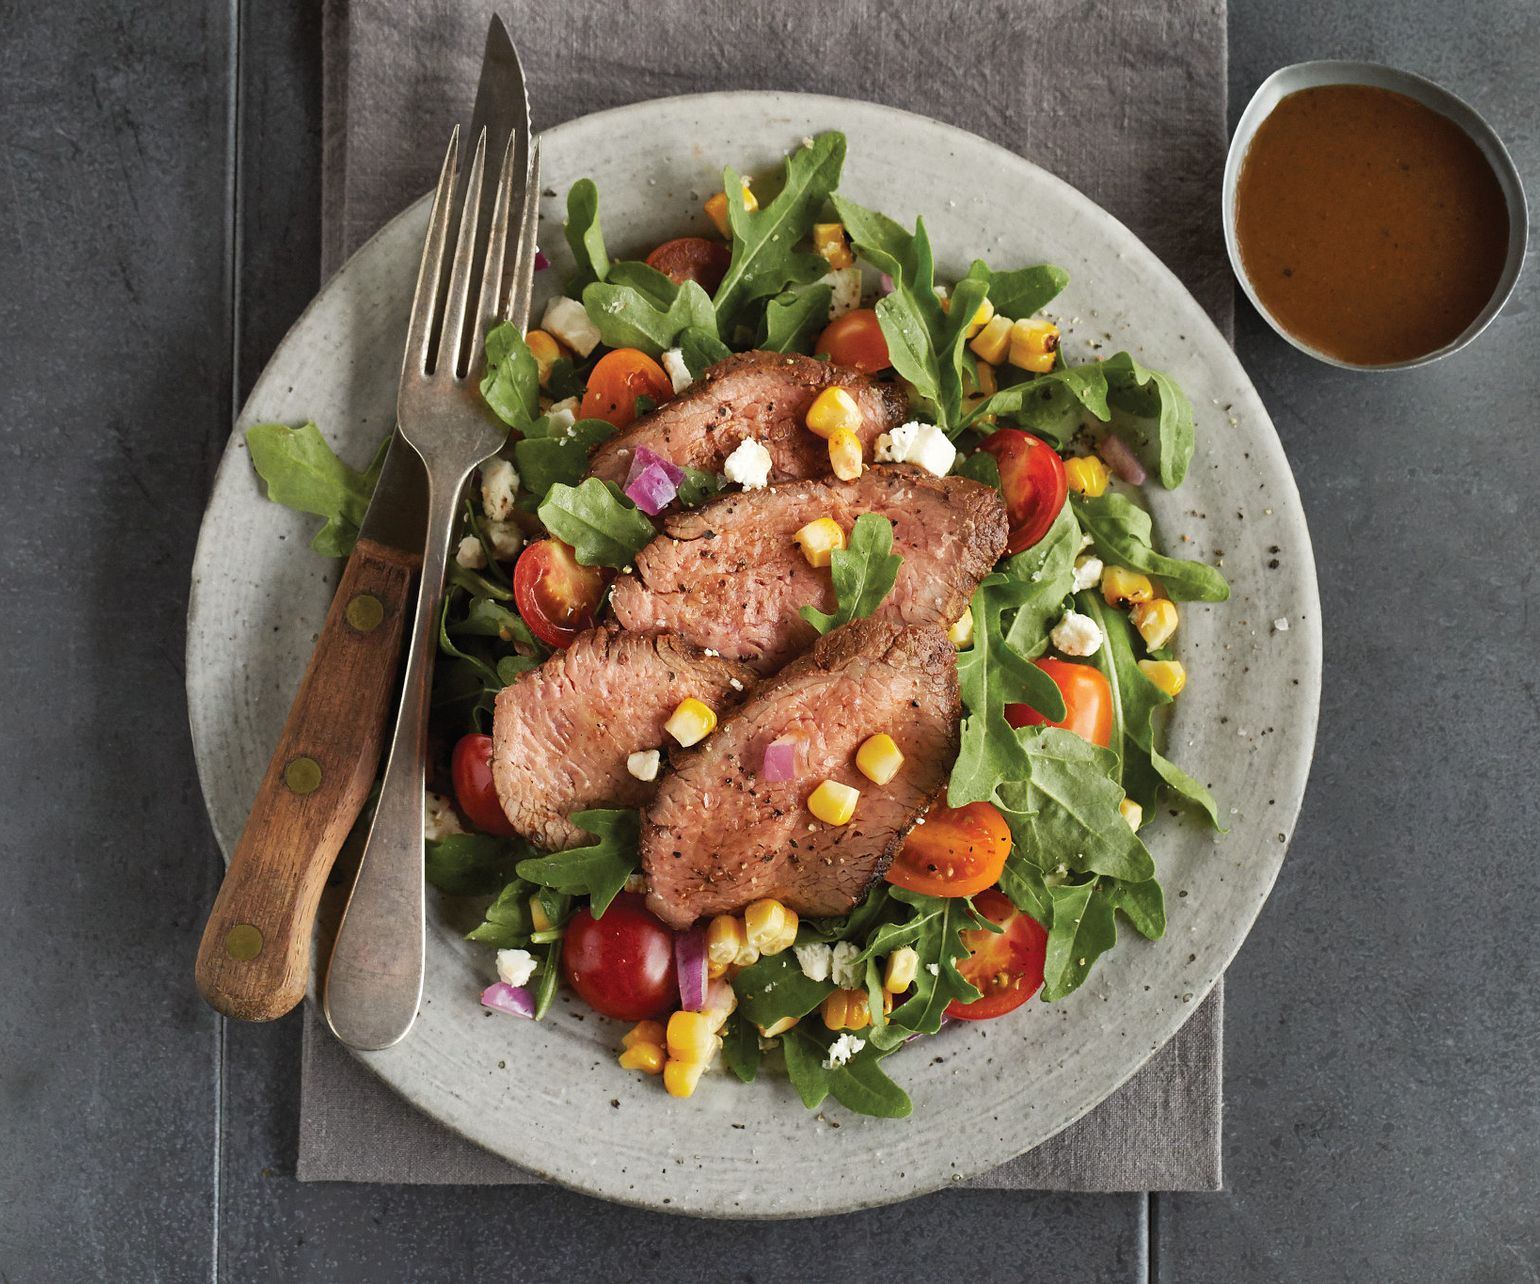 Grilled Beef Tri-Tip Salad with Balsamic Dressing